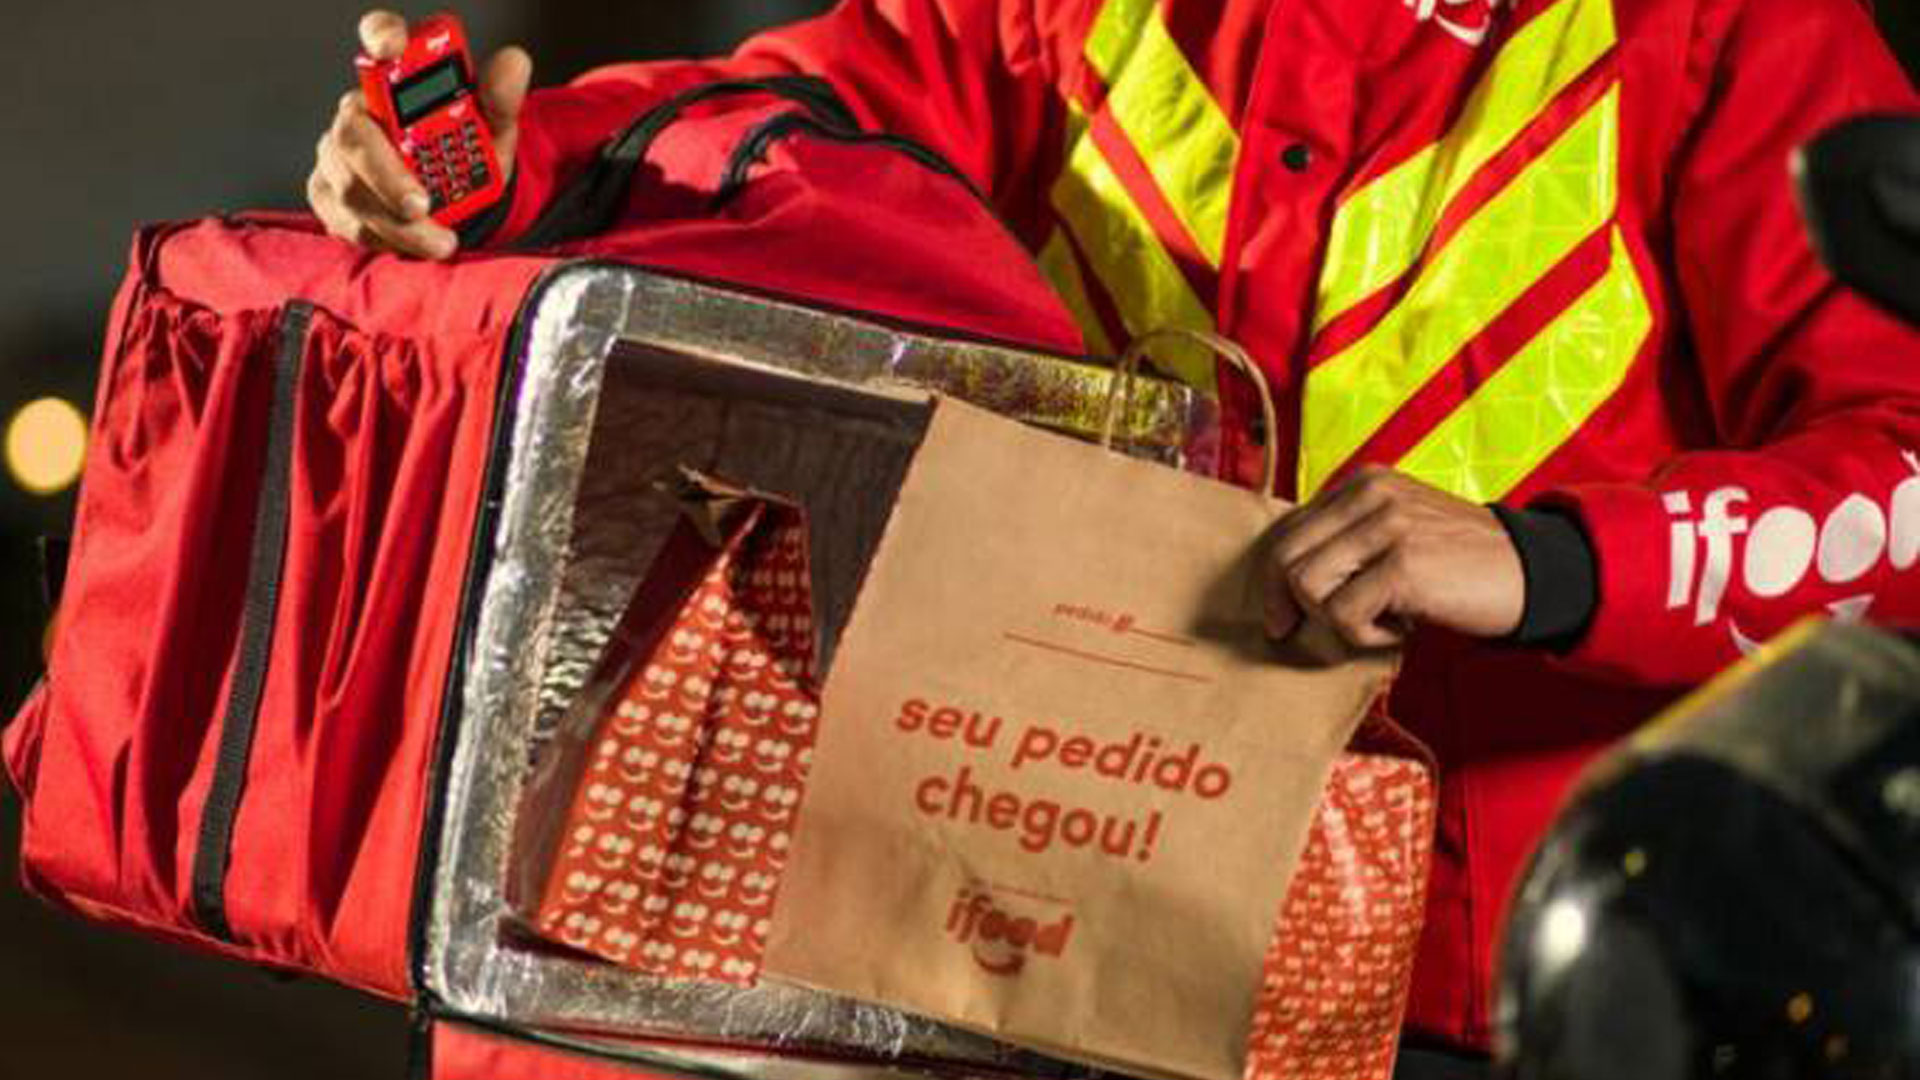 ifood aims deliverymen in new campaign.